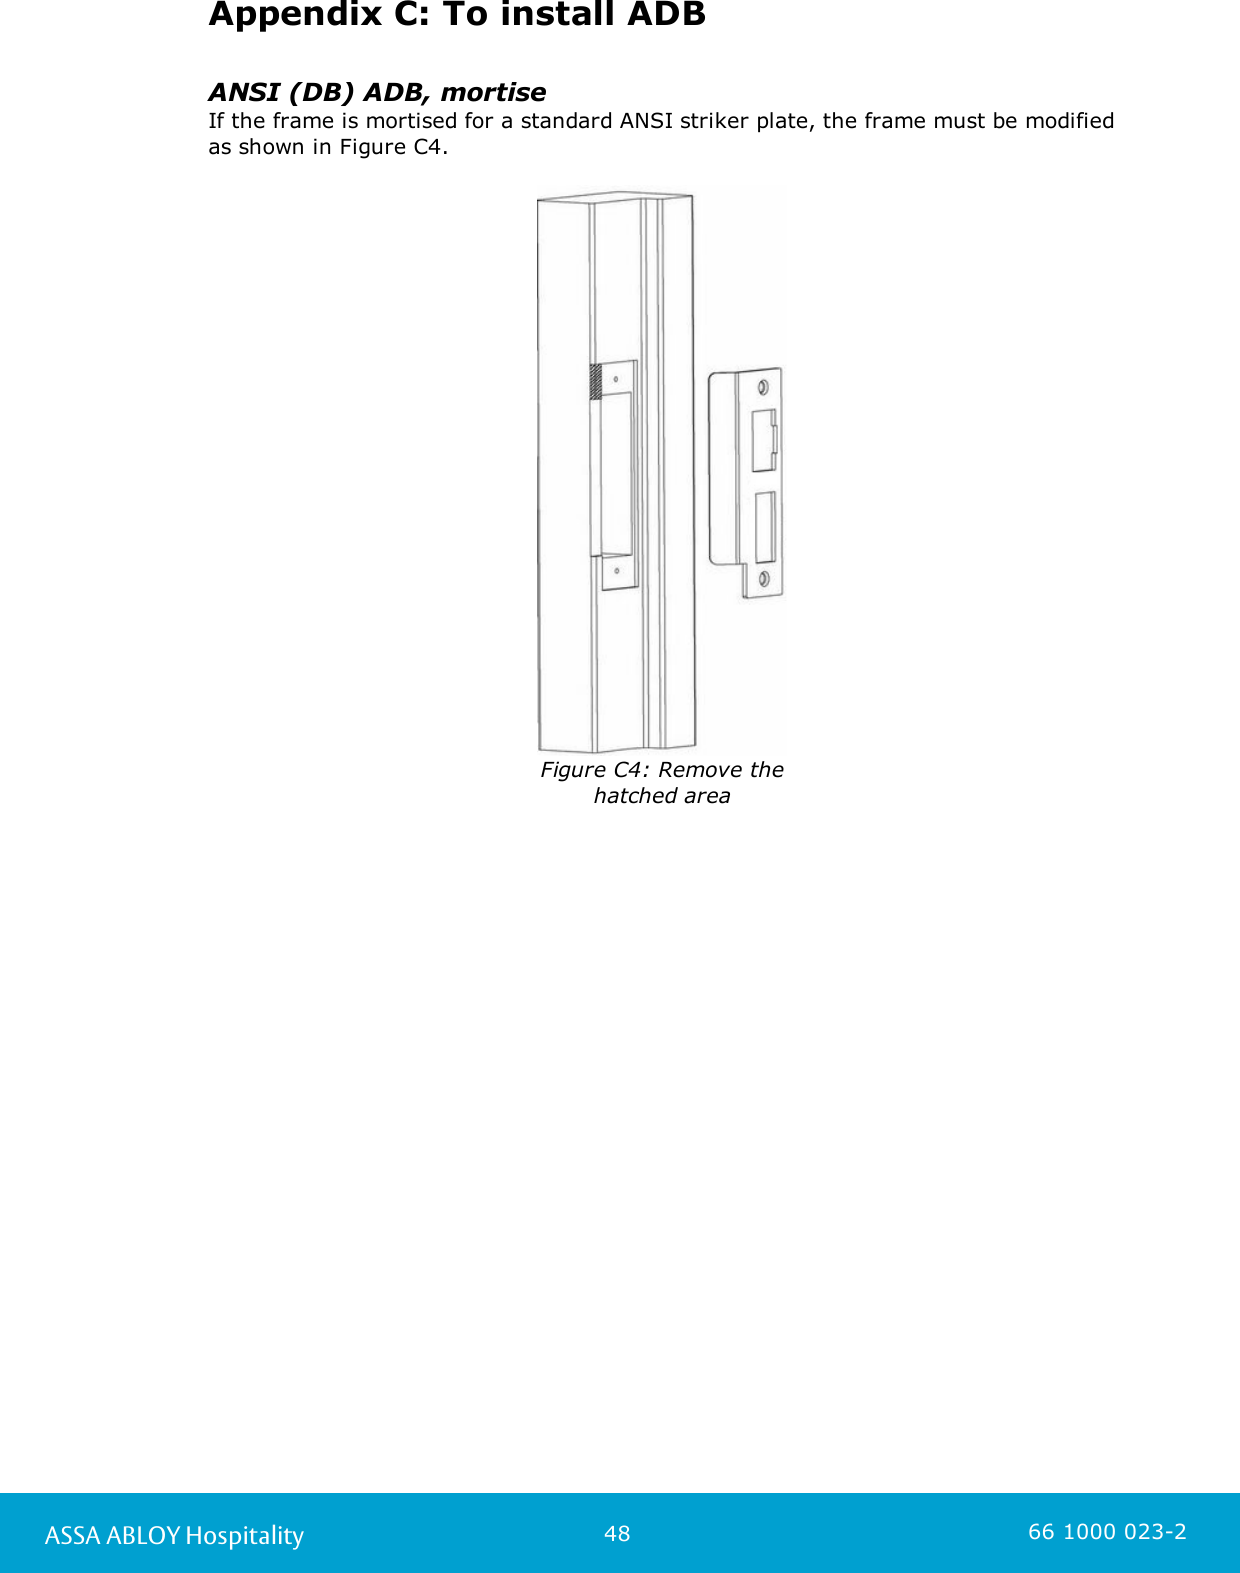 48ASSA ABLOY Hospitality 66 1000 023-2Appendix C: To install ADBANSI (DB) ADB, mortiseIf the frame is mortised for a standard ANSI striker plate, the frame must be modifiedas shown in Figure C4.Figure C4: Remove thehatched area